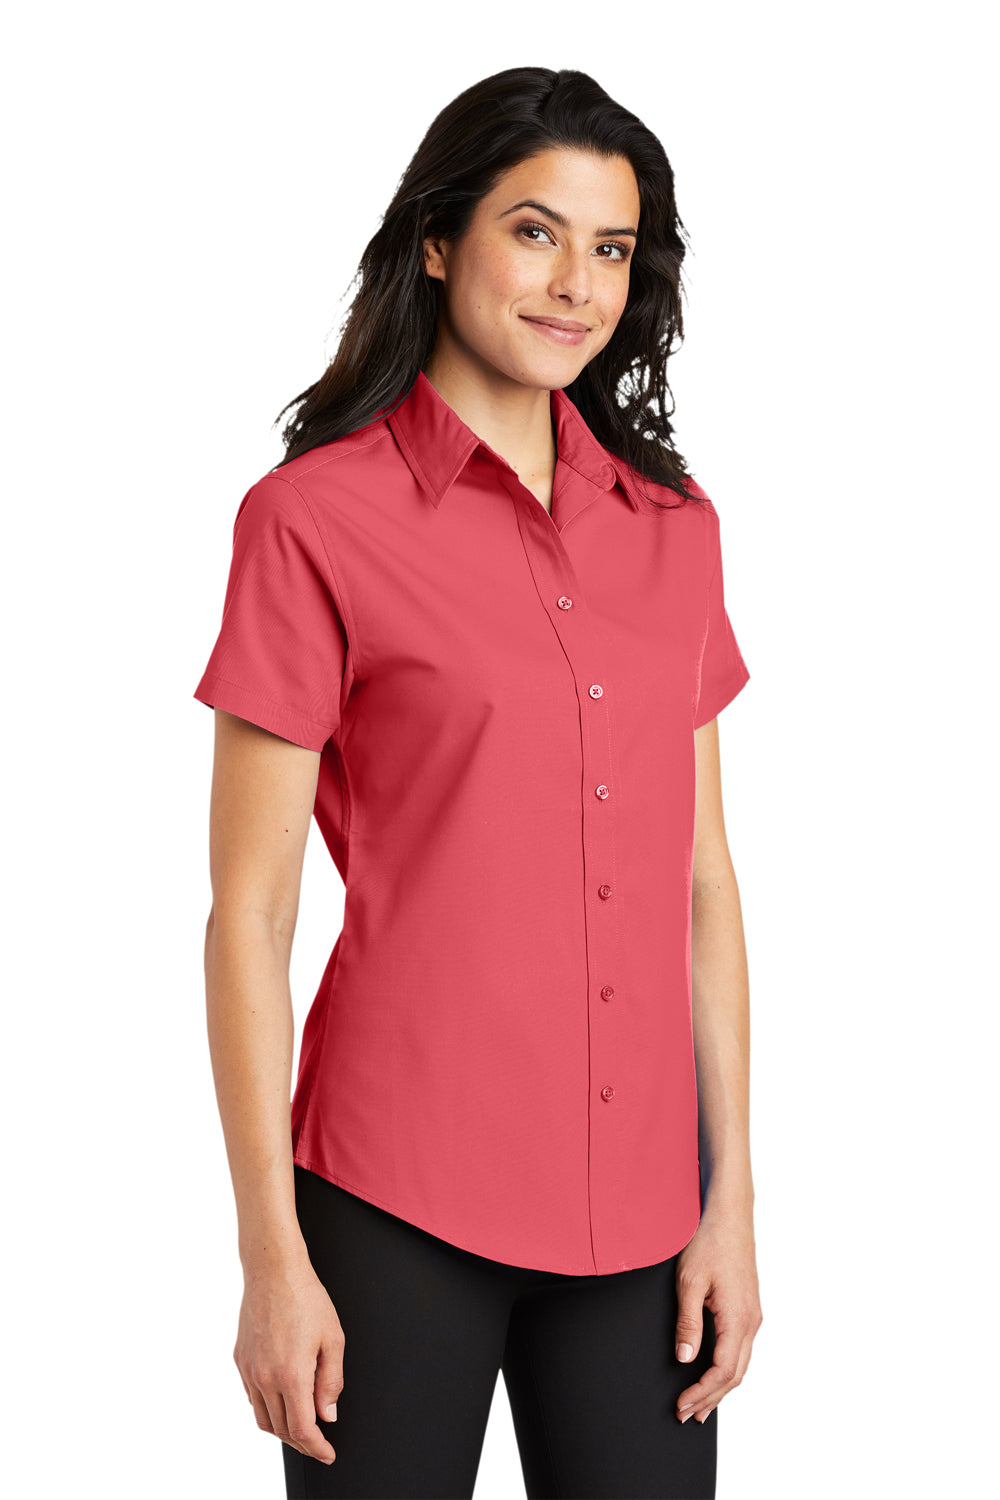 Port Authority L508 Womens Easy Care Wrinkle Resistant Short Sleeve Button Down Shirt Hibiscus Pink 3Q